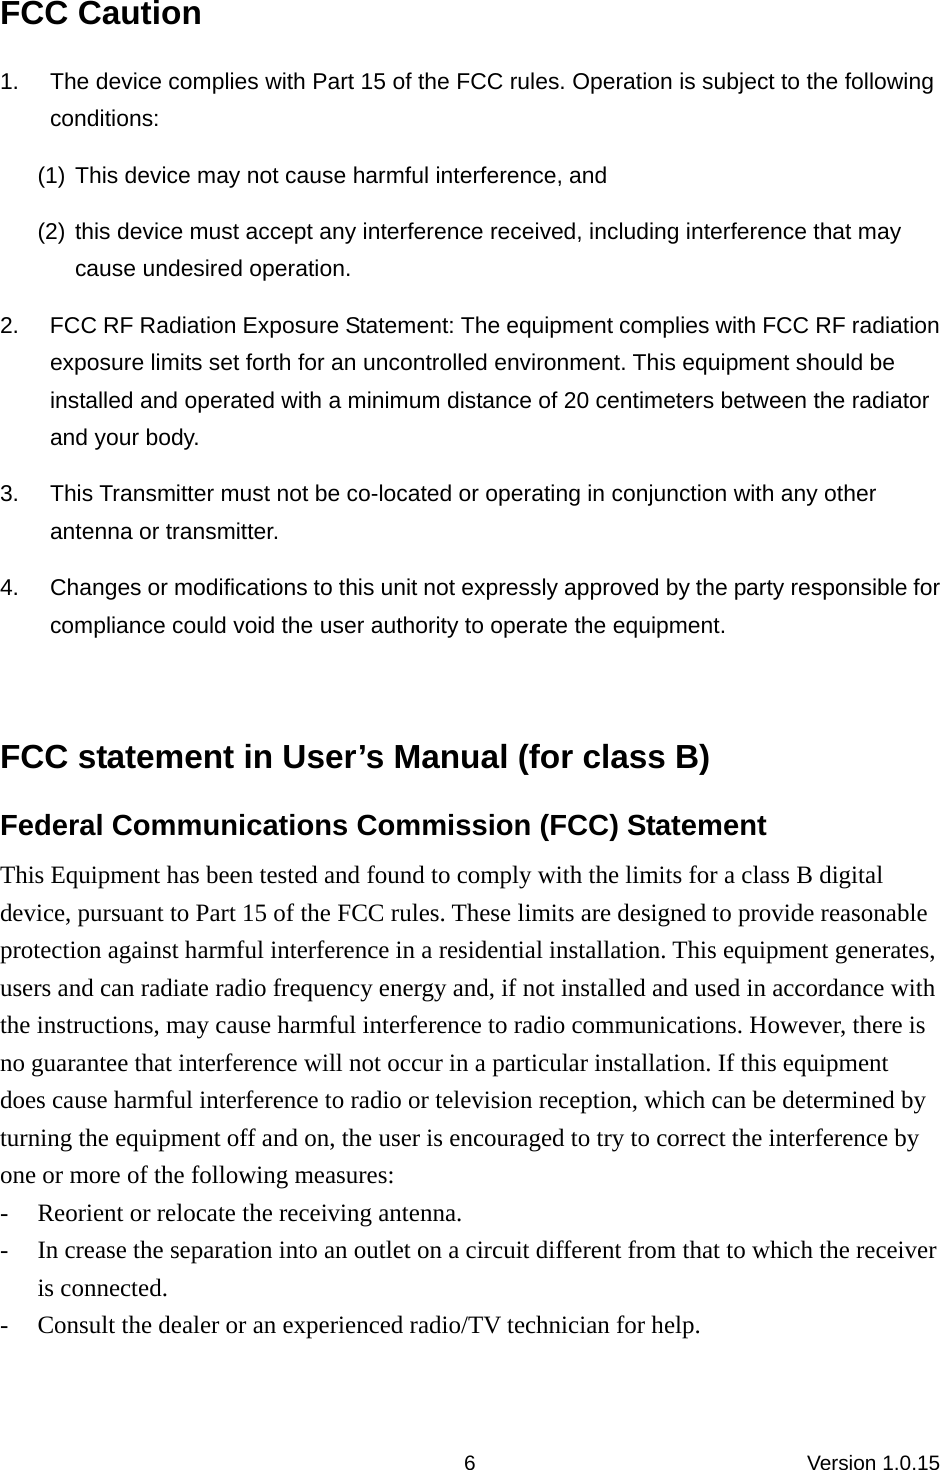 Version 1.0.15 6FCC Caution 1.  The device complies with Part 15 of the FCC rules. Operation is subject to the following conditions:  (1) This device may not cause harmful interference, and (2) this device must accept any interference received, including interference that may cause undesired operation.   2.  FCC RF Radiation Exposure Statement: The equipment complies with FCC RF radiation exposure limits set forth for an uncontrolled environment. This equipment should be installed and operated with a minimum distance of 20 centimeters between the radiator and your body.   3.  This Transmitter must not be co-located or operating in conjunction with any other antenna or transmitter.   4.  Changes or modifications to this unit not expressly approved by the party responsible for compliance could void the user authority to operate the equipment.    FCC statement in User’s Manual (for class B) Federal Communications Commission (FCC) Statement This Equipment has been tested and found to comply with the limits for a class B digital device, pursuant to Part 15 of the FCC rules. These limits are designed to provide reasonable protection against harmful interference in a residential installation. This equipment generates, users and can radiate radio frequency energy and, if not installed and used in accordance with the instructions, may cause harmful interference to radio communications. However, there is no guarantee that interference will not occur in a particular installation. If this equipment does cause harmful interference to radio or television reception, which can be determined by turning the equipment off and on, the user is encouraged to try to correct the interference by one or more of the following measures: - Reorient or relocate the receiving antenna. - In crease the separation into an outlet on a circuit different from that to which the receiver is connected. - Consult the dealer or an experienced radio/TV technician for help.  